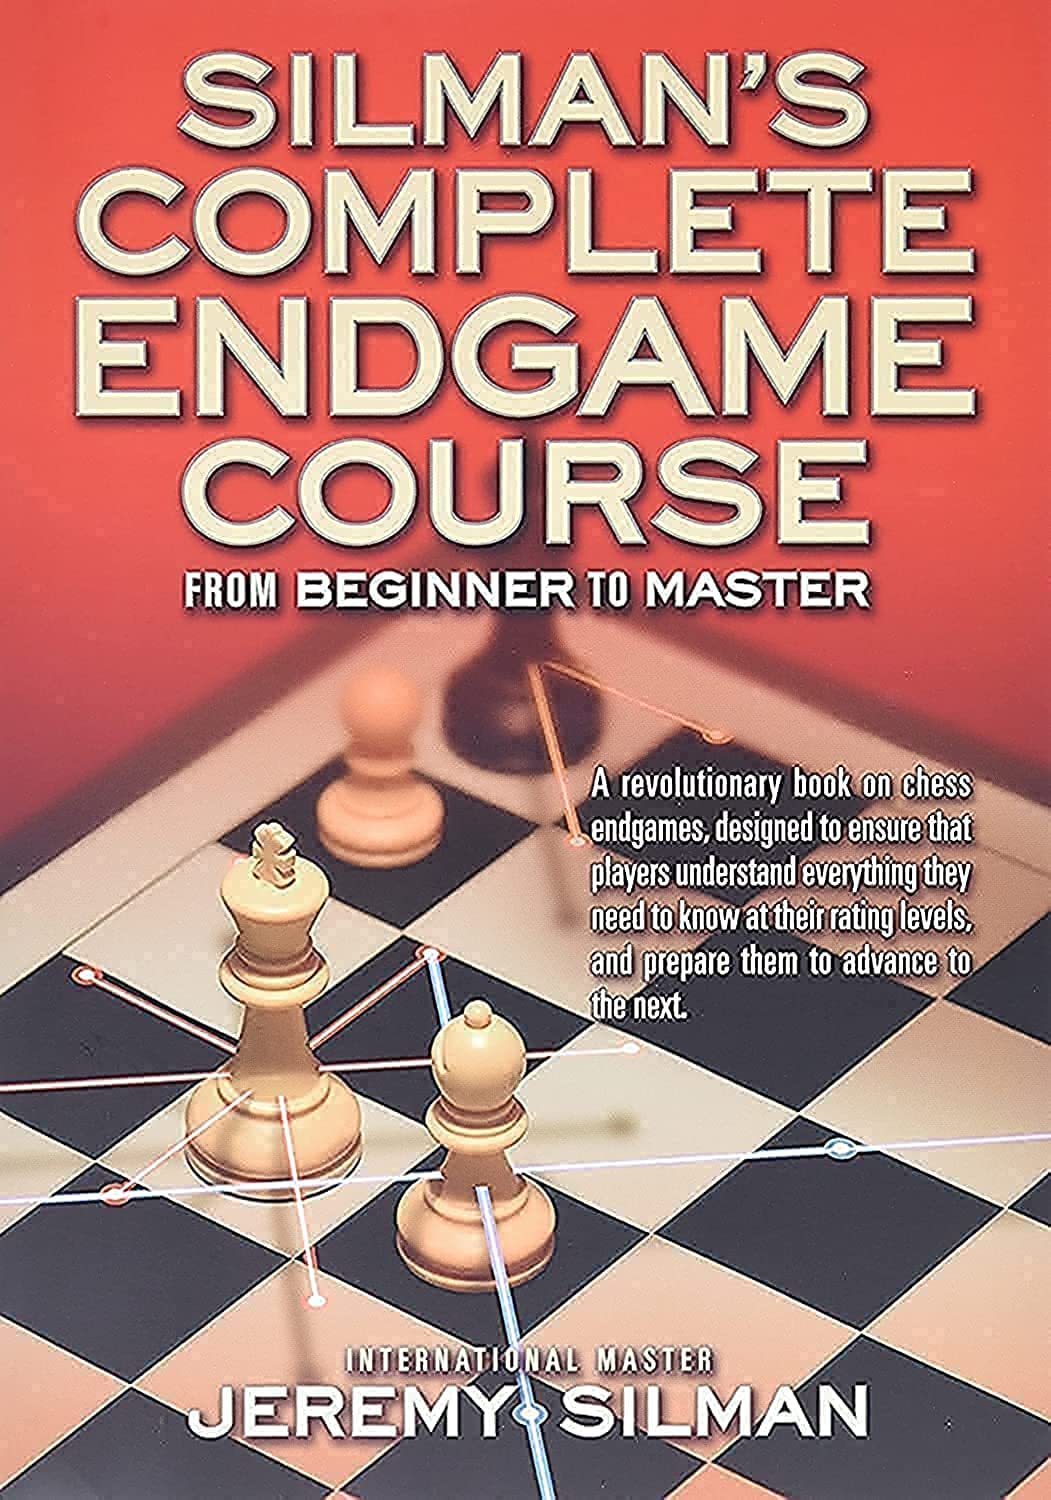 Silman's Complete Endgame Course by Jeremy Silman